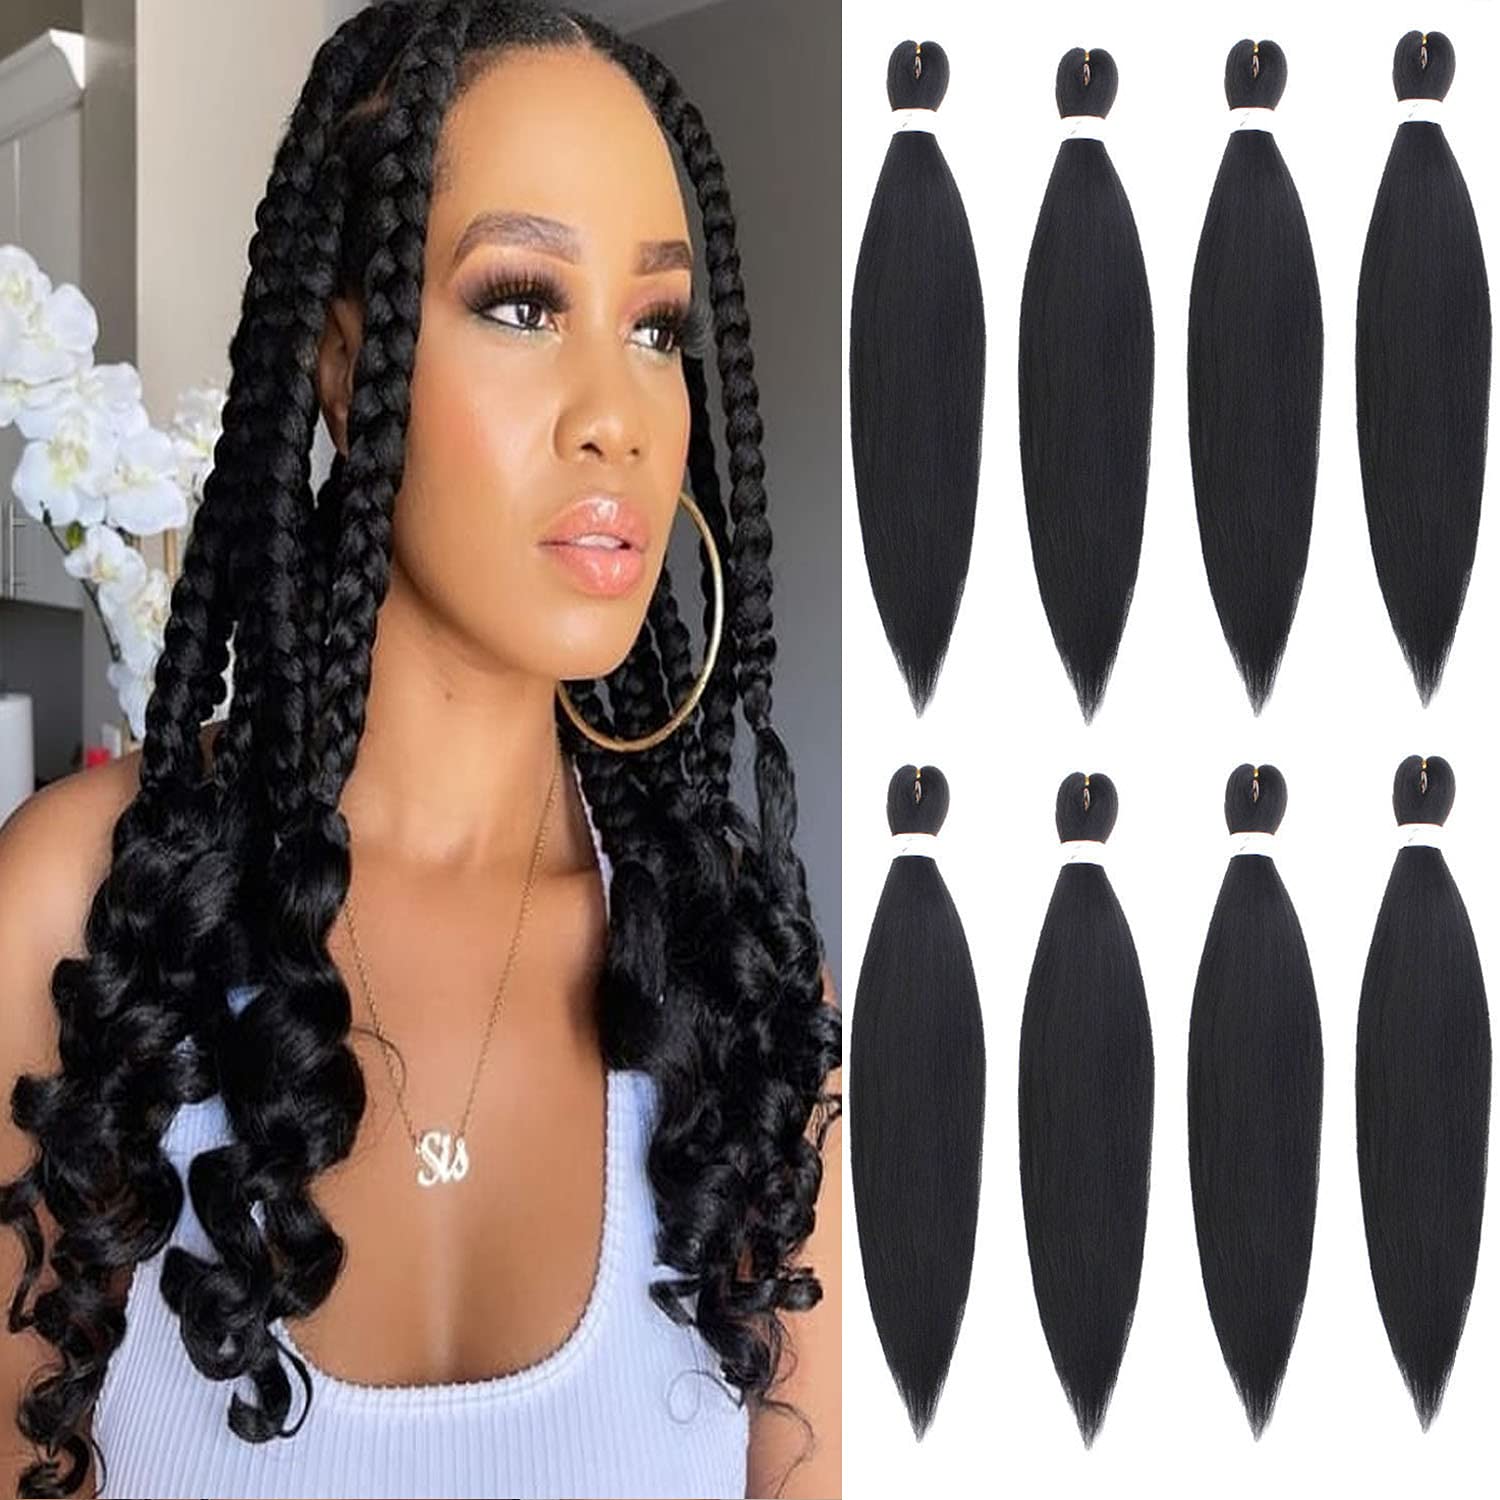 Pre-stretched Braids Hair Professional Itch Free Hot Water Setting  Synthetic Fiber Ombre Yaki Texture Braid Hair Extensions 26 Inch 8 Packs  Beyond